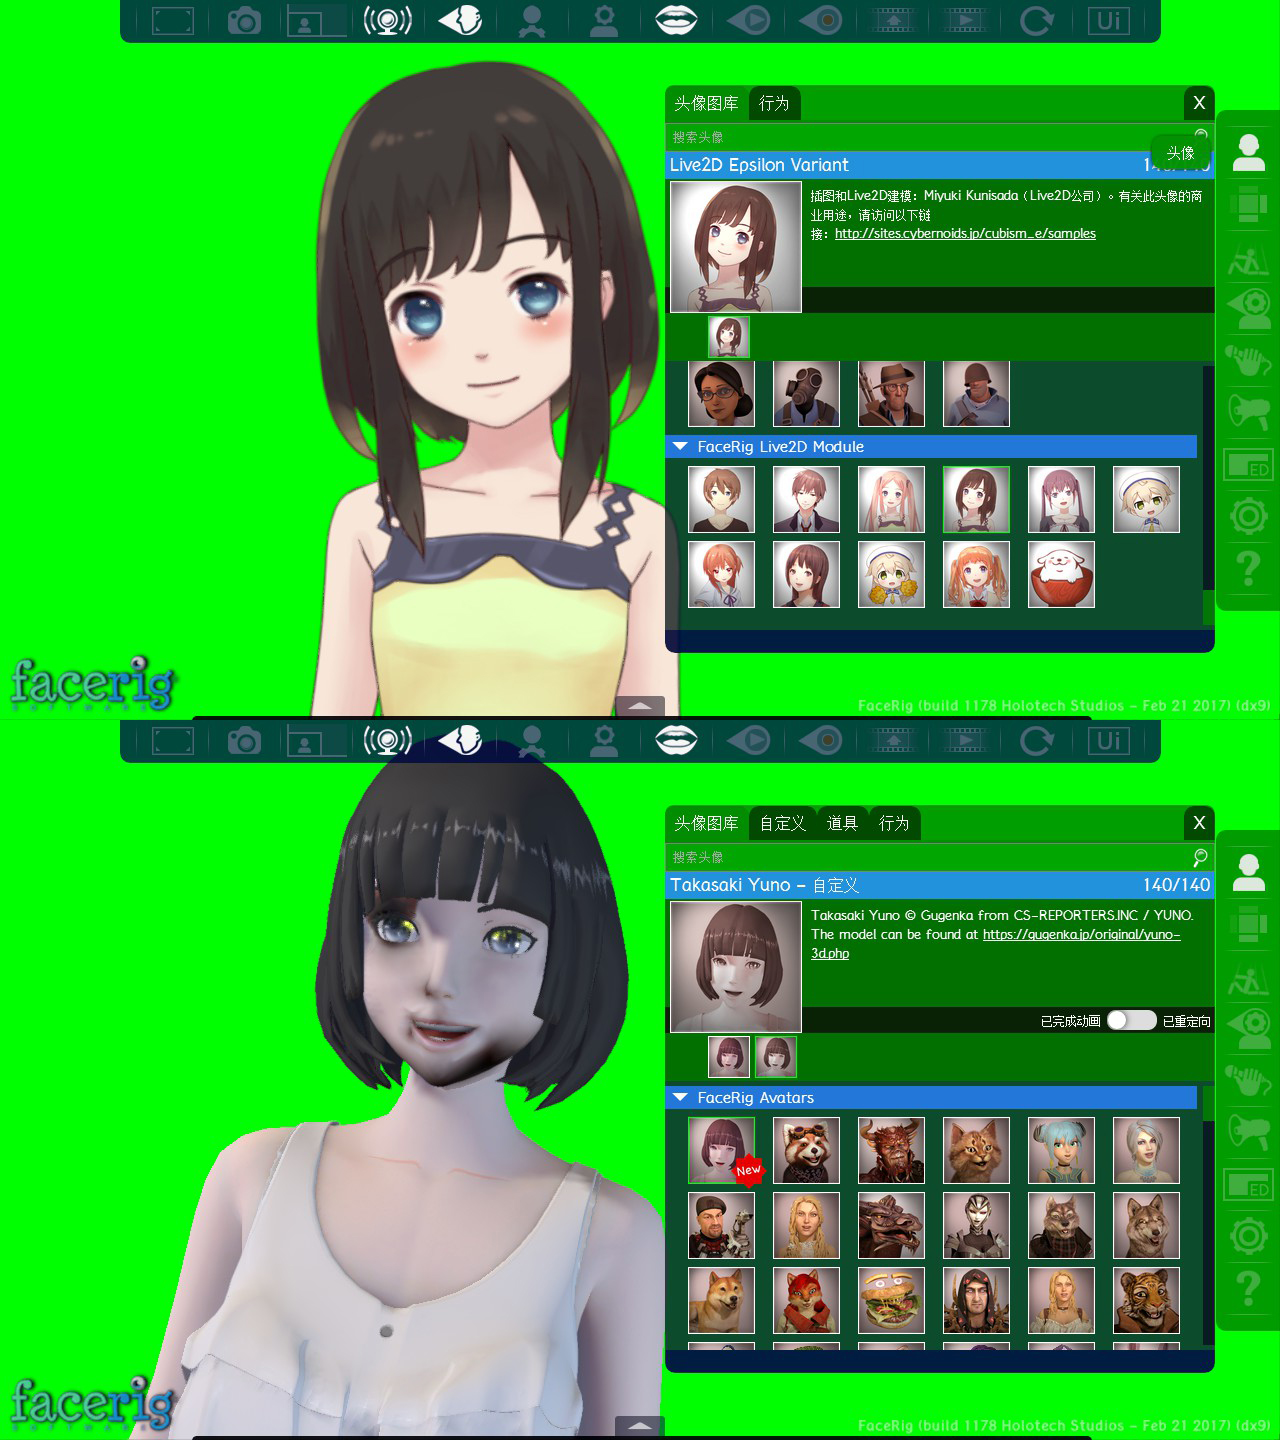 run facerig without steam